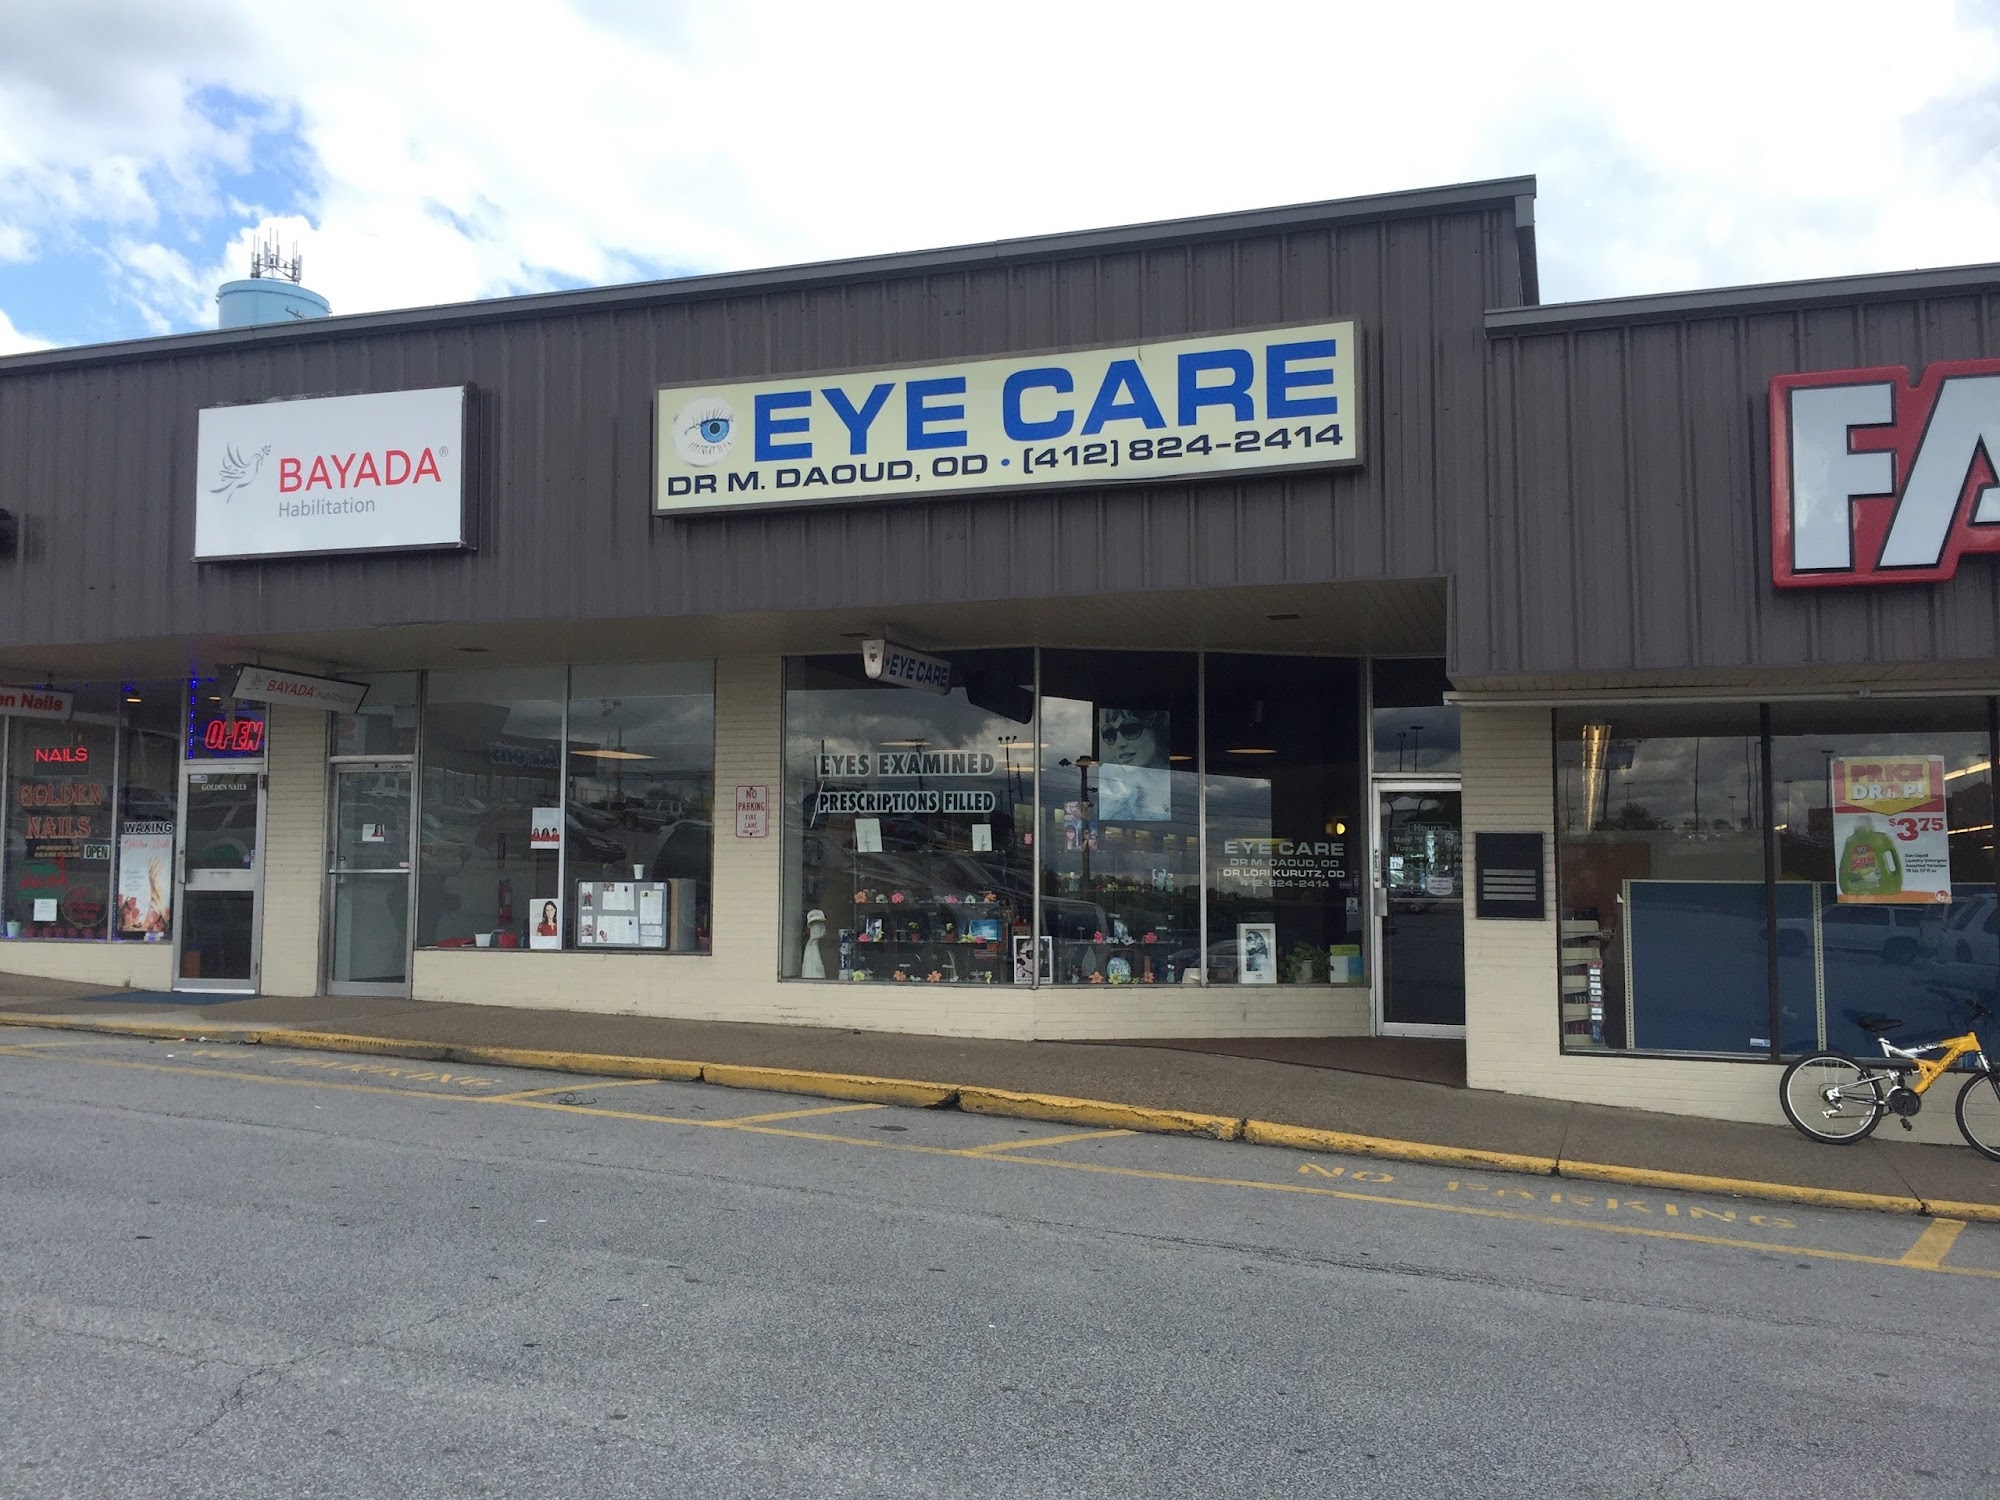 Daoud Eye Care 355 Lincoln Hwy Ste 9, North Versailles Pennsylvania 15137